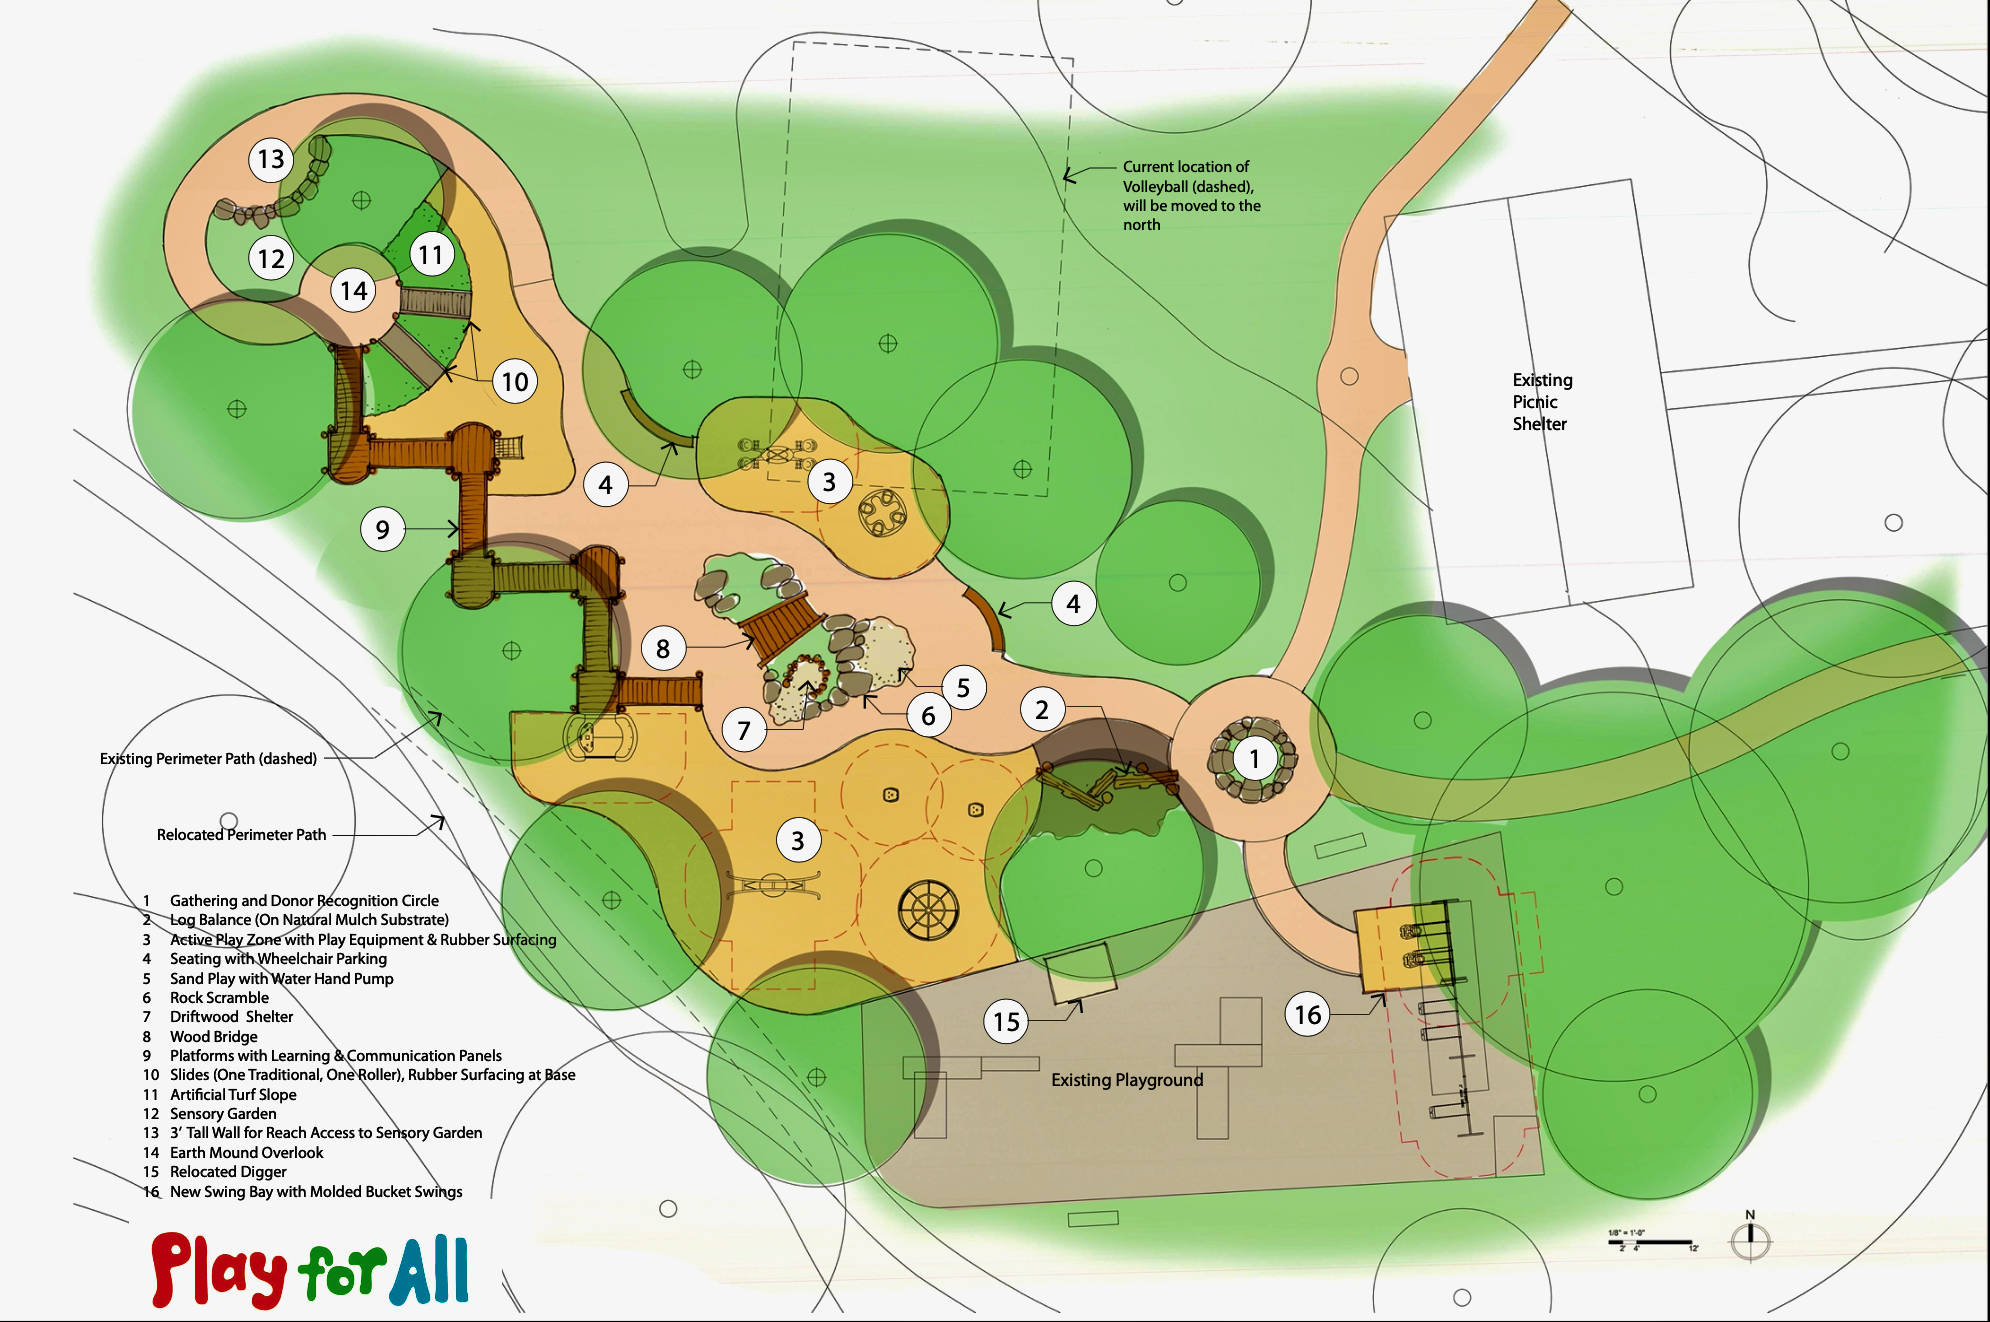 Adding 9 structures to the playground at Raab Park will expand the footprint to 9,000 square feet of inclusive fun. (courtesy photo)